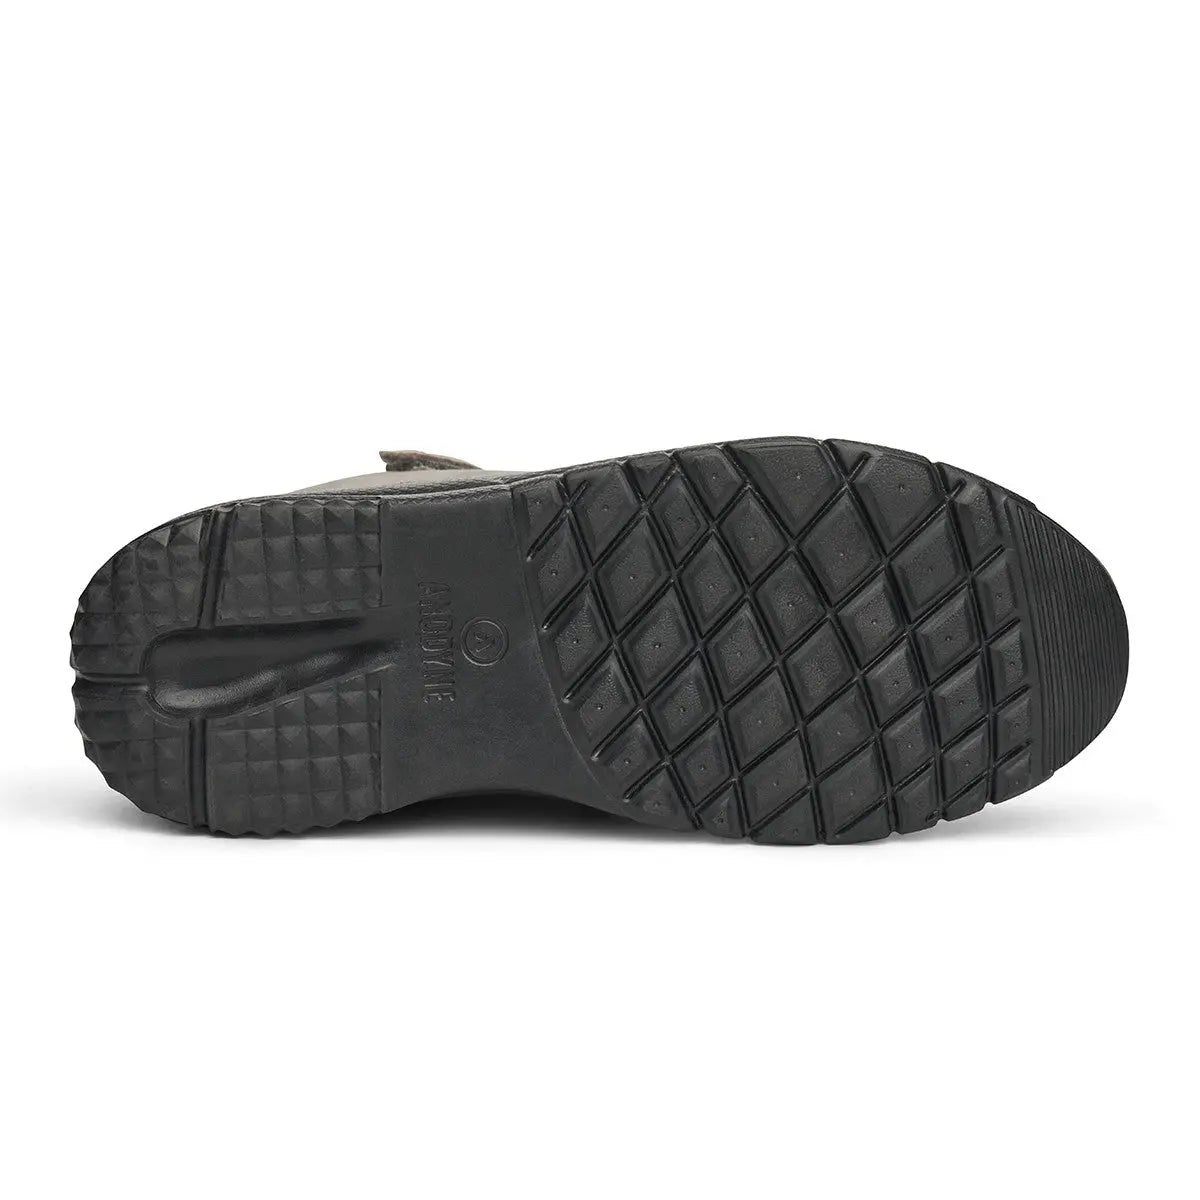 comfortable sole of a diabetic shoe that weights 9.4 oz